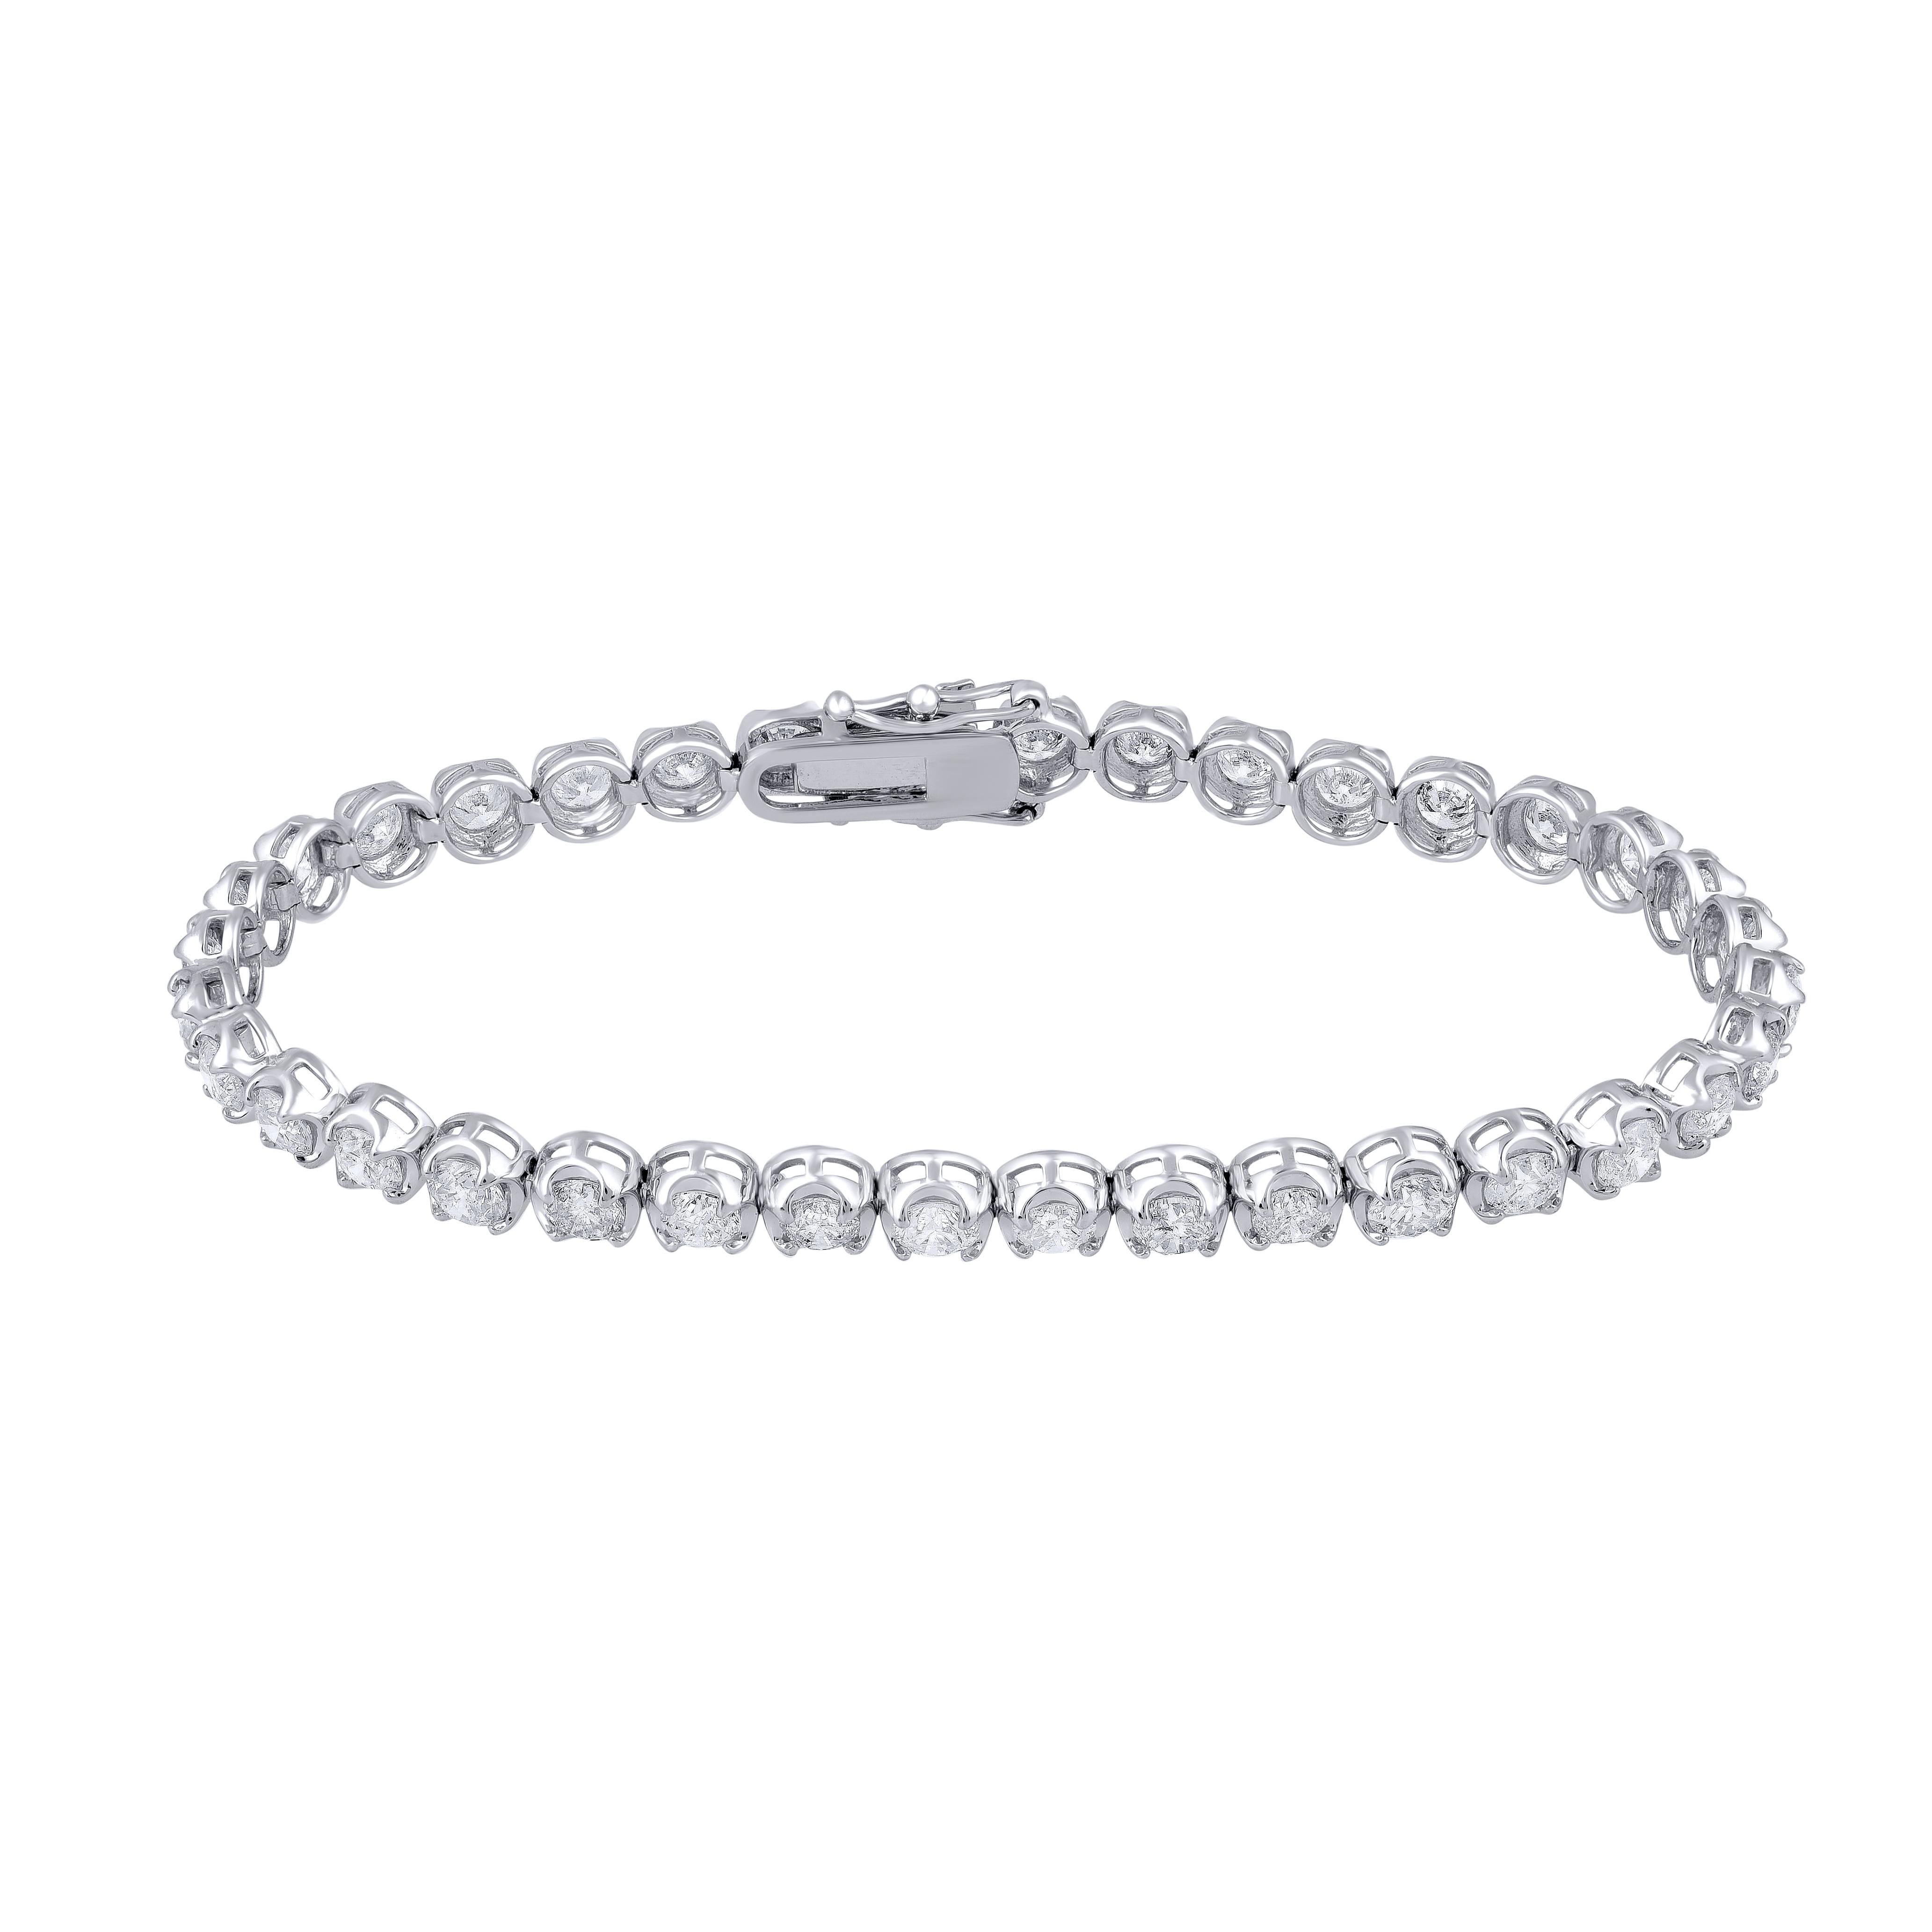 Add a shimmering touch to your look with this brilliant bracelet. Set with 36 diamonds in prong setting, it is crafted in 14 KT gold, diamond details GH Color, I1-I2 Clarity. The bracelet comes along with a IGI certificate of authentication.